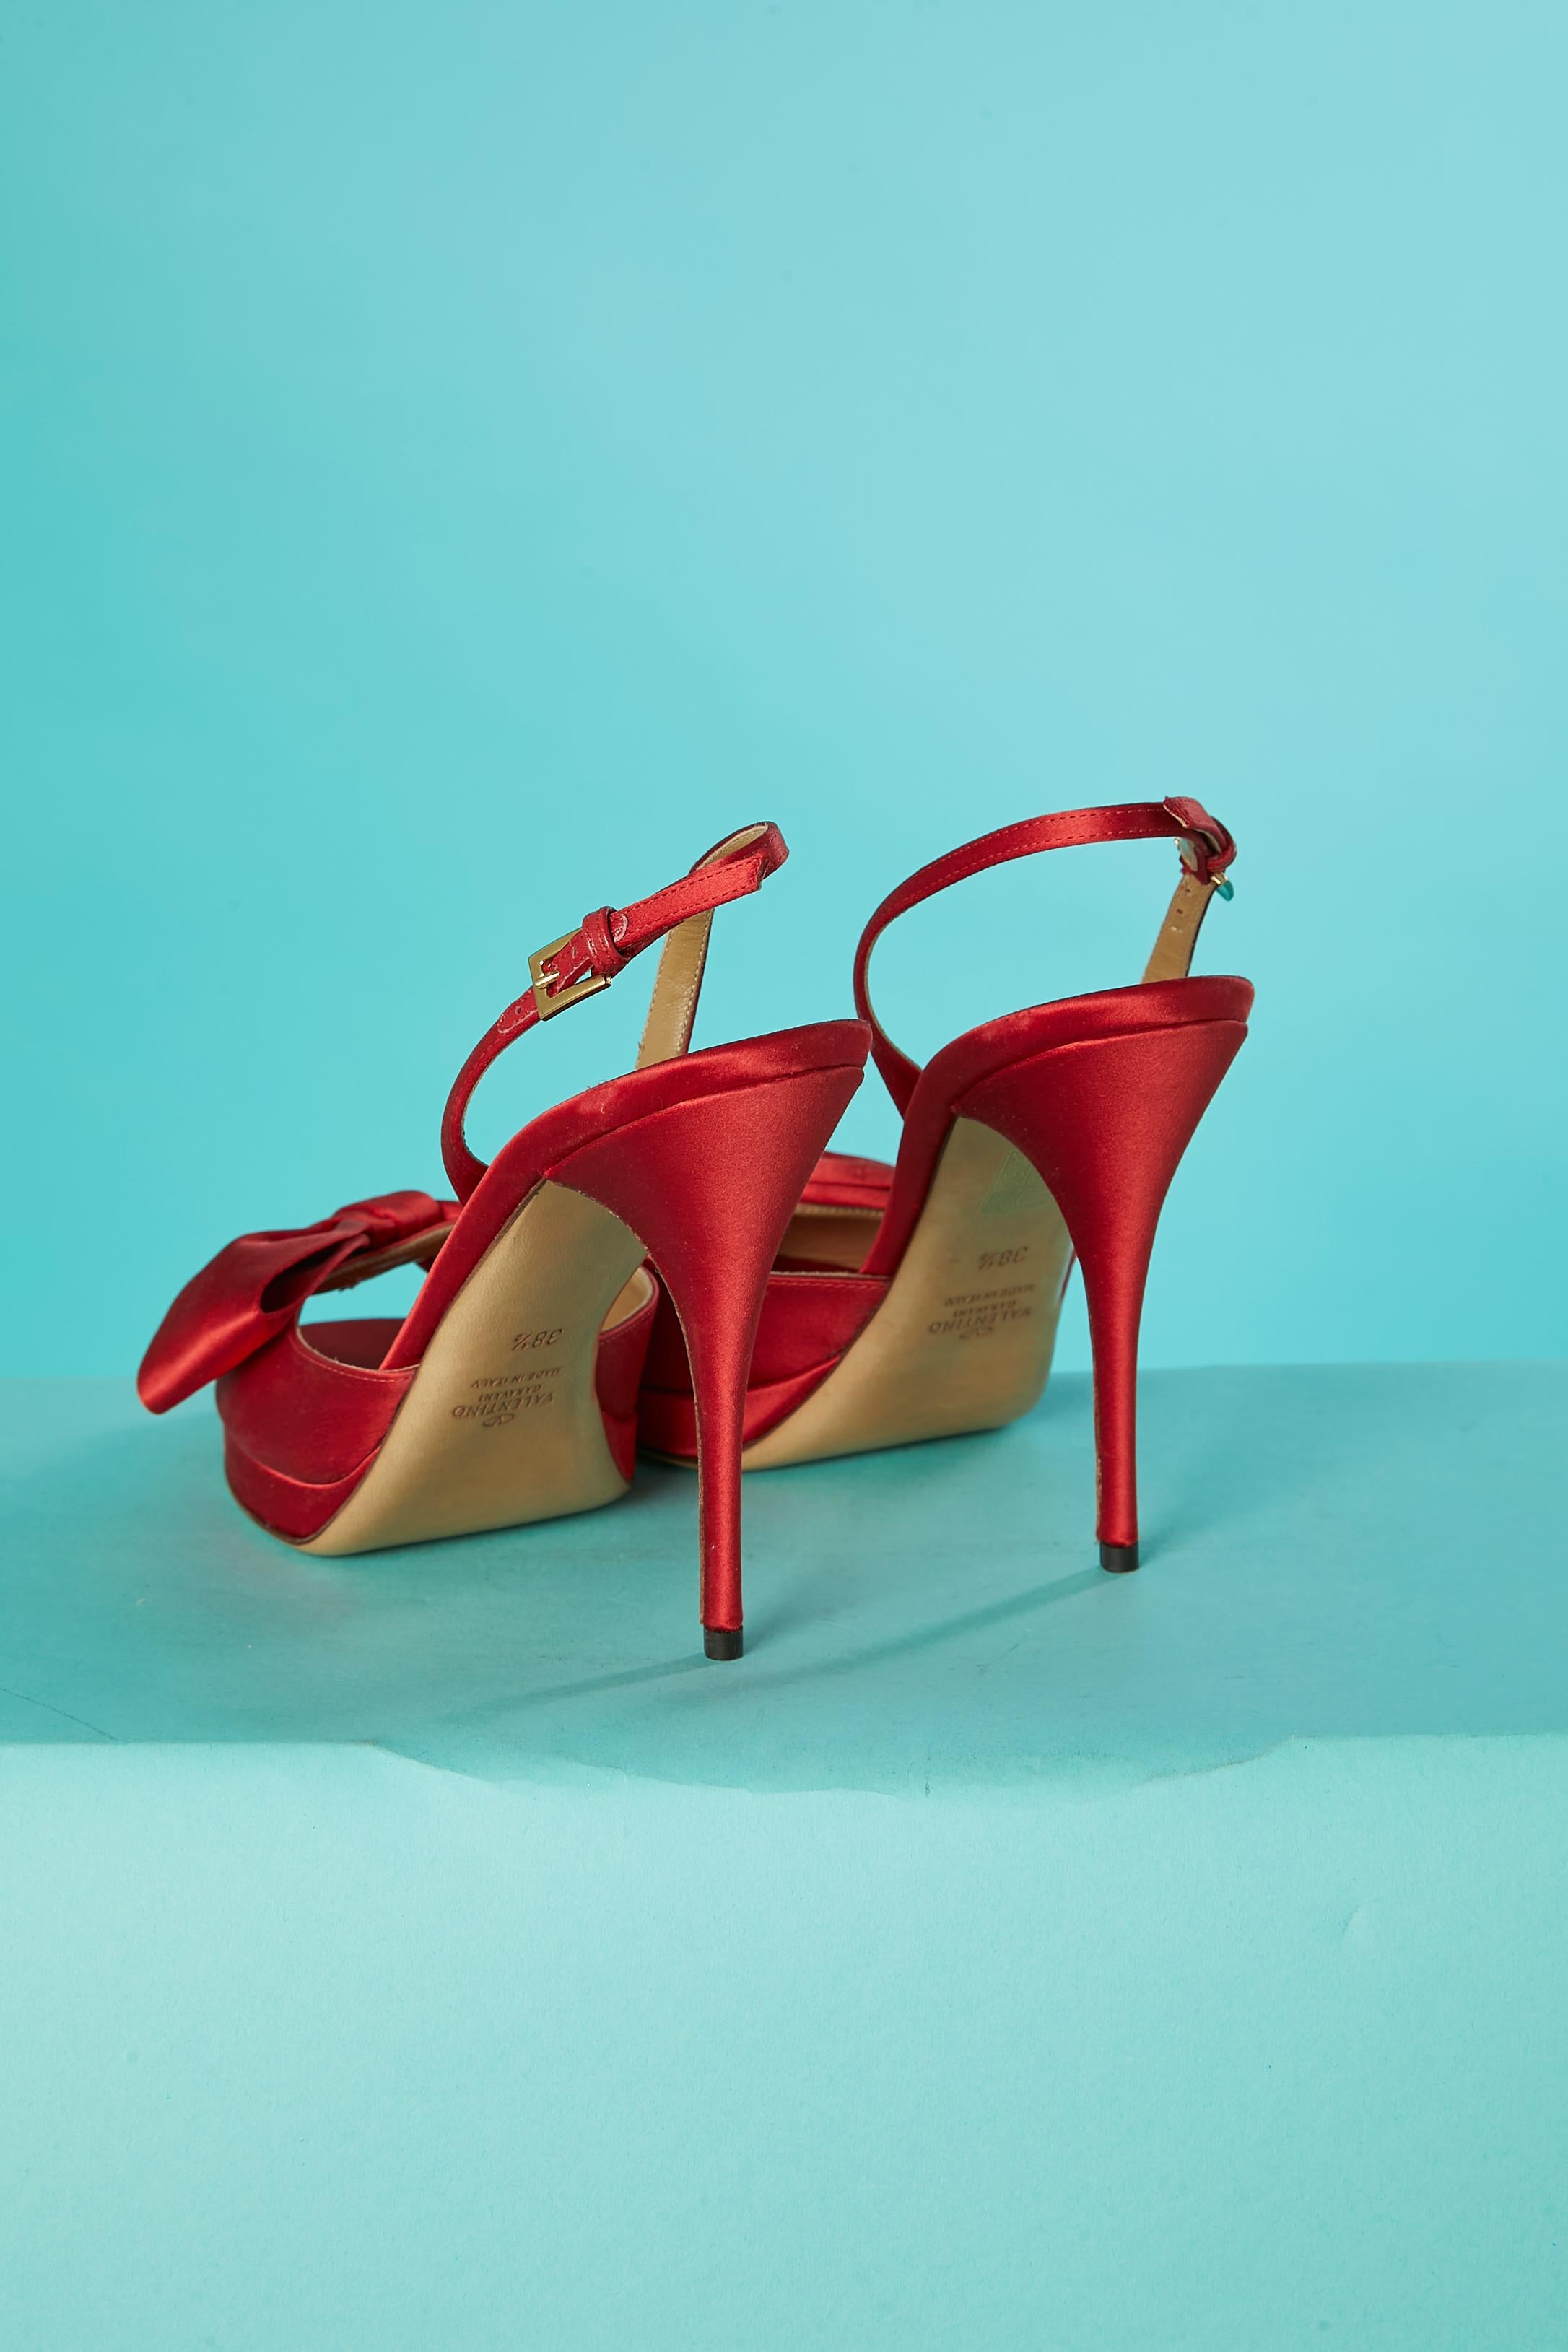 Red Open toe high heels red satin sandals with bow Valentino Garavani 